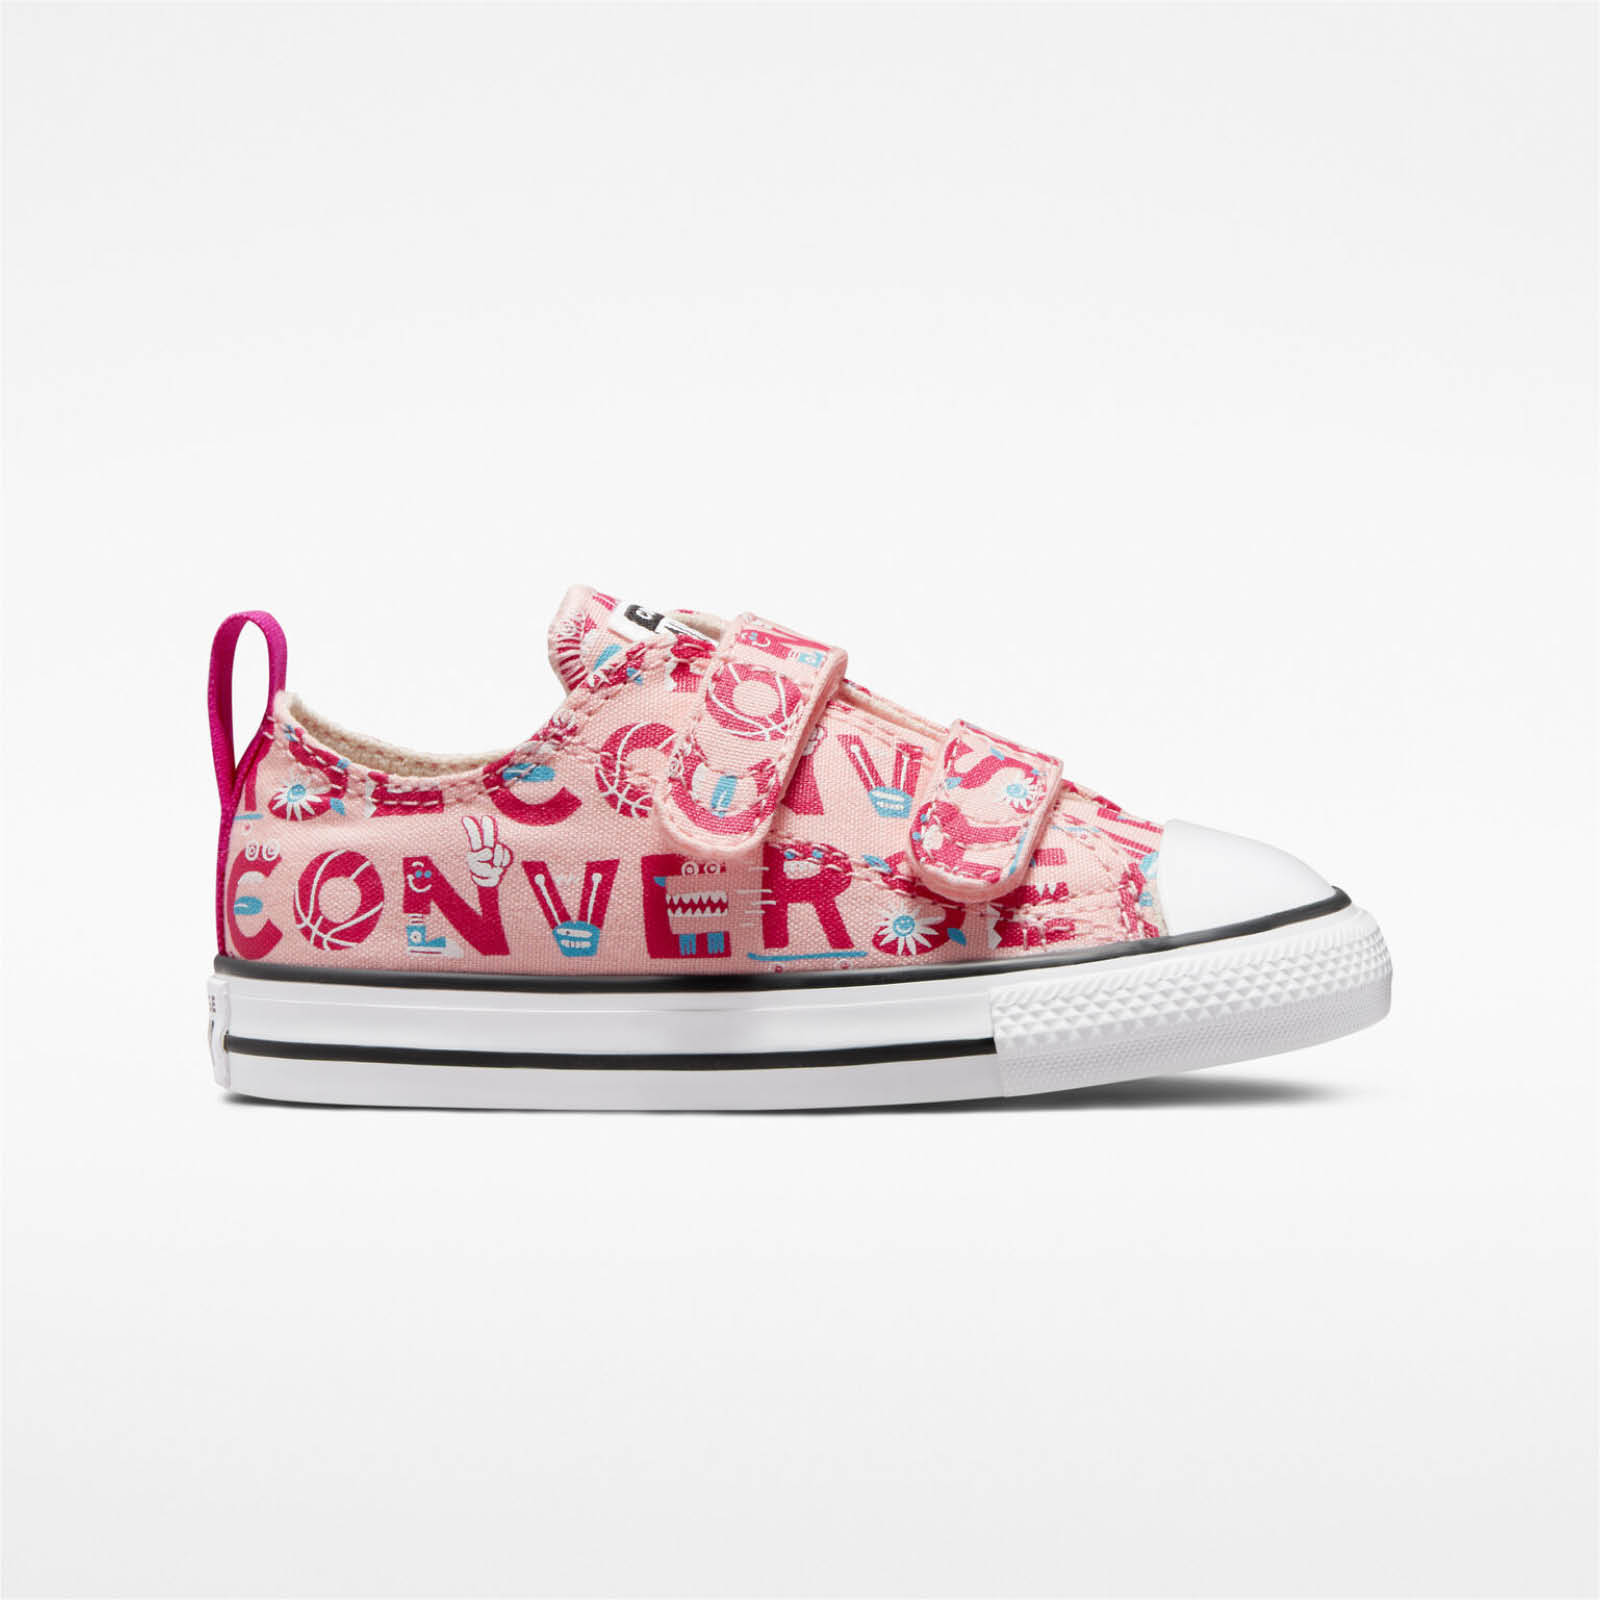 Converse - CHUCK TAYLOR ALL STAR 2V CREATURE FEATURE - 689-STORM PINK/NATURAL IVORY